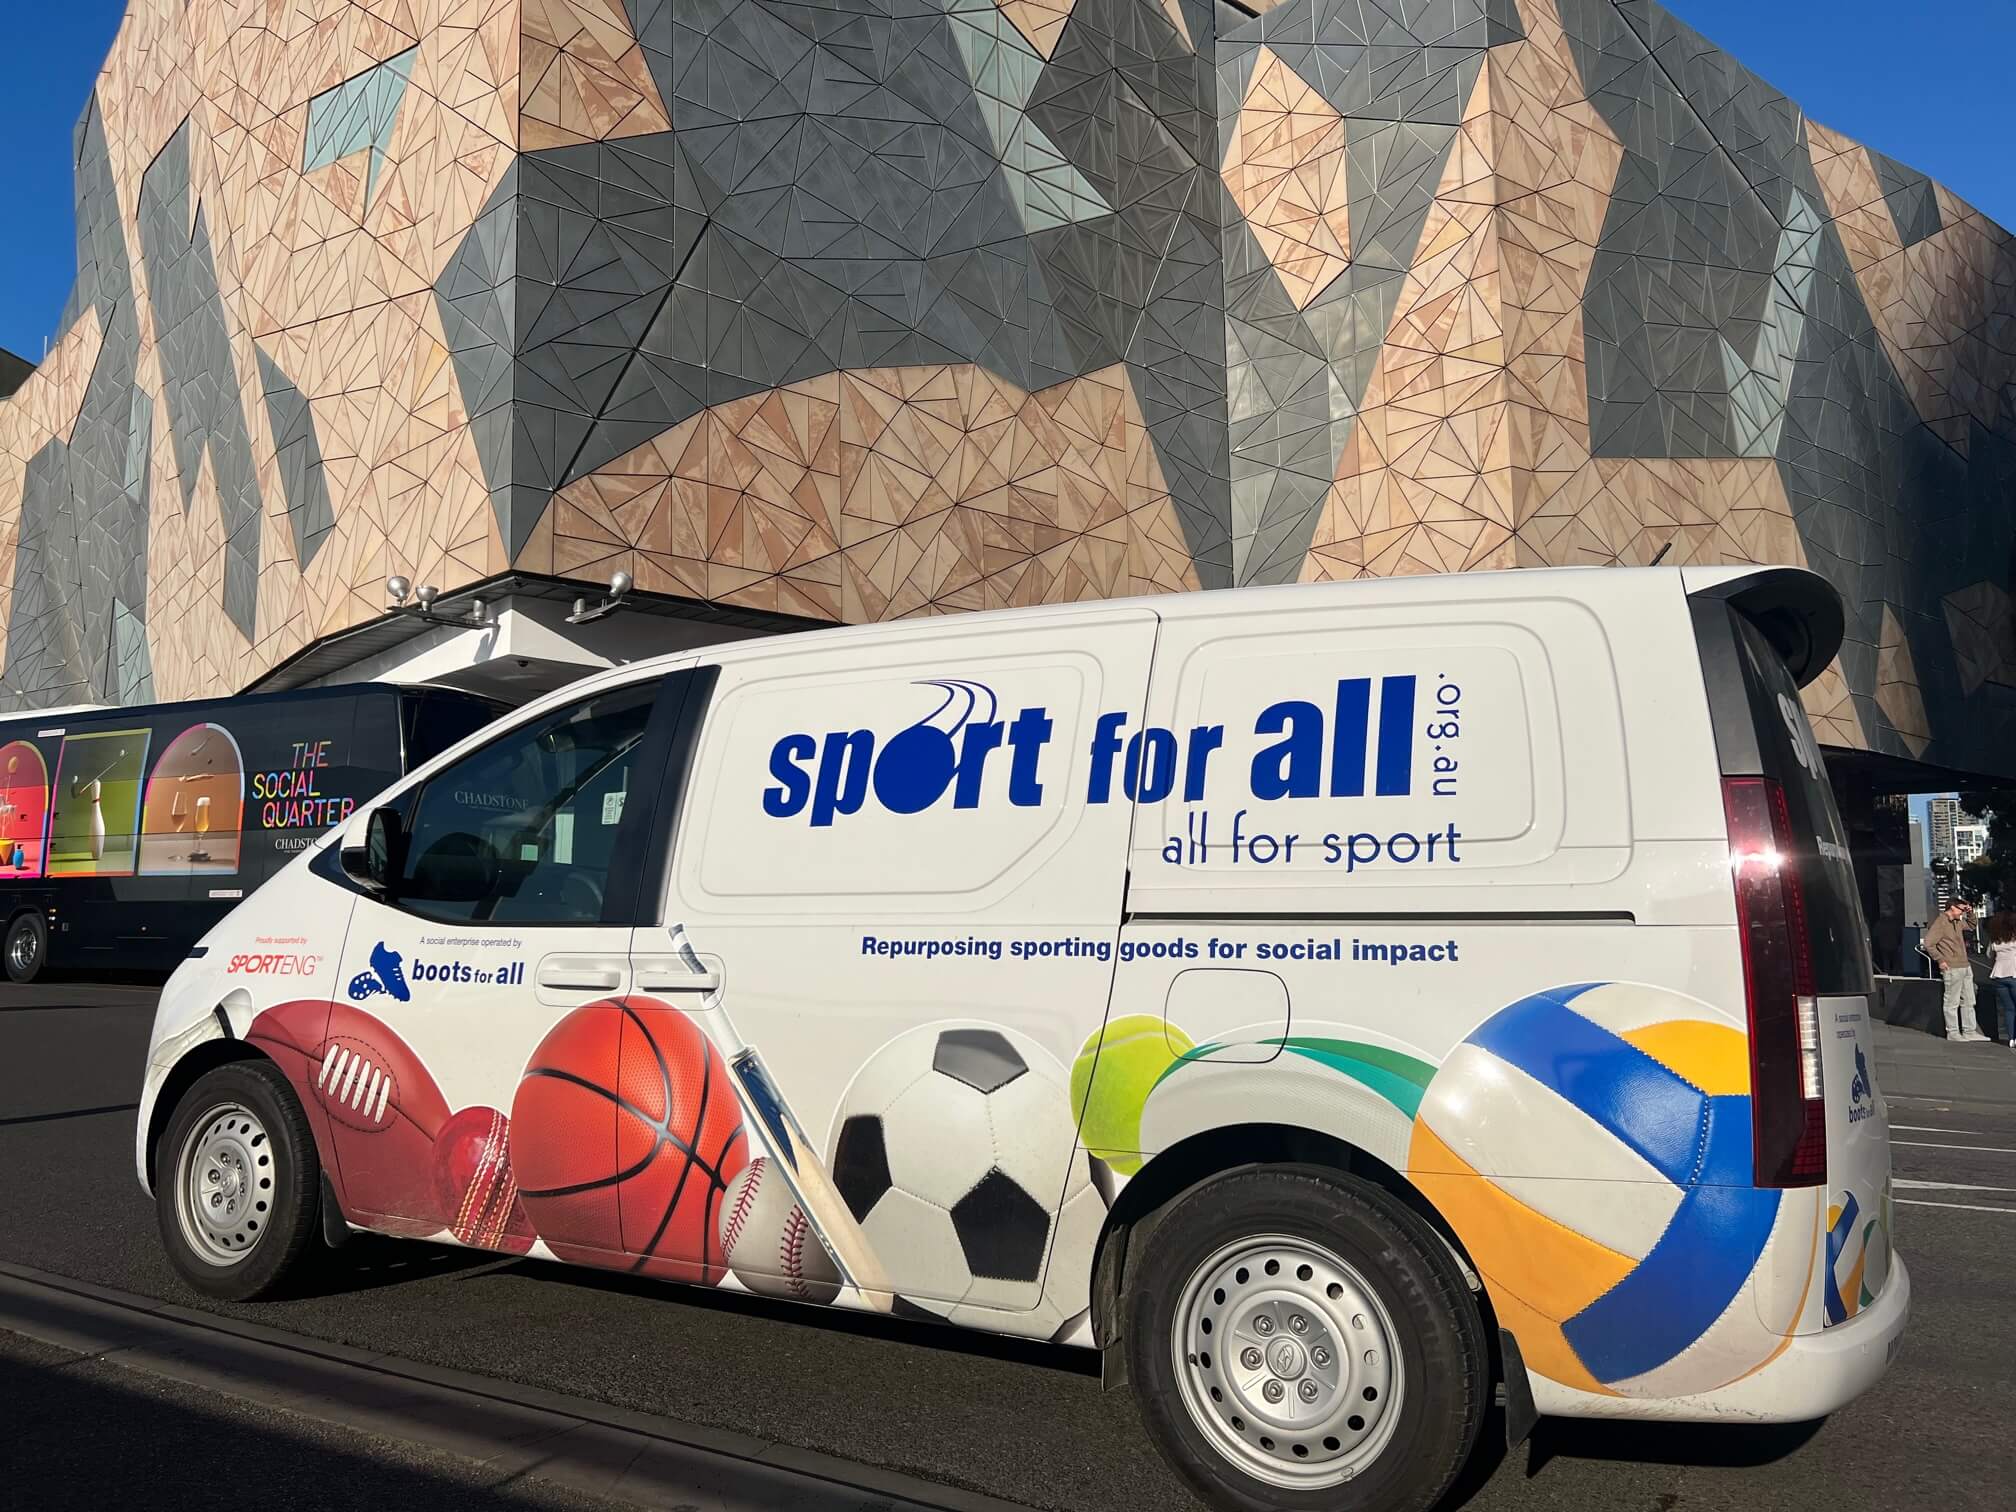 Van with sports ball images on it parked in front of an art building